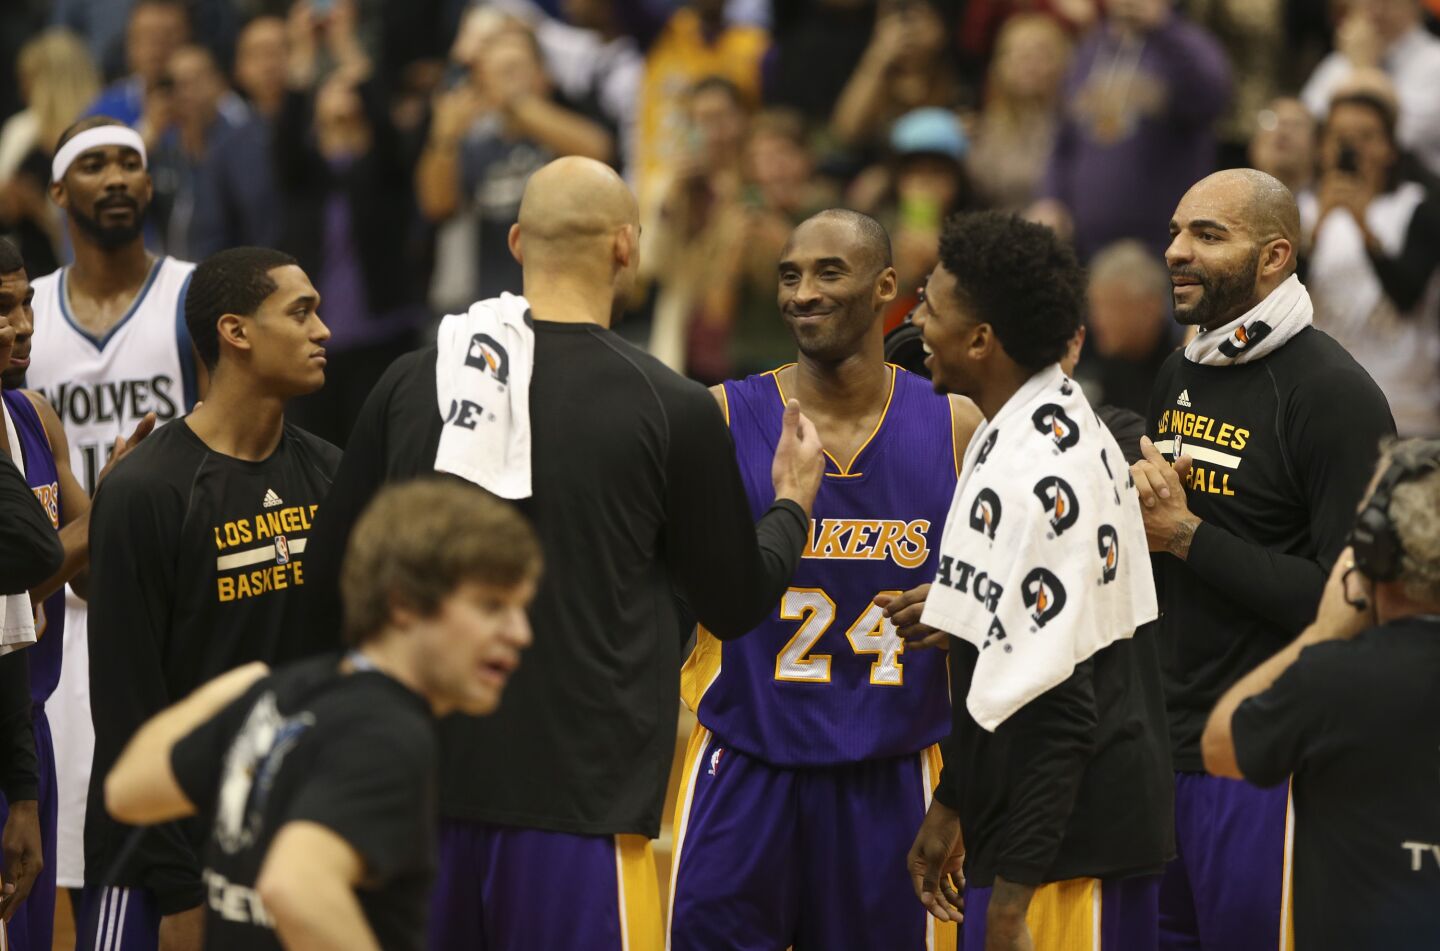 Teammates congratulate Kobe Bryant after he passed Michael Jordan's career points total in 2014.